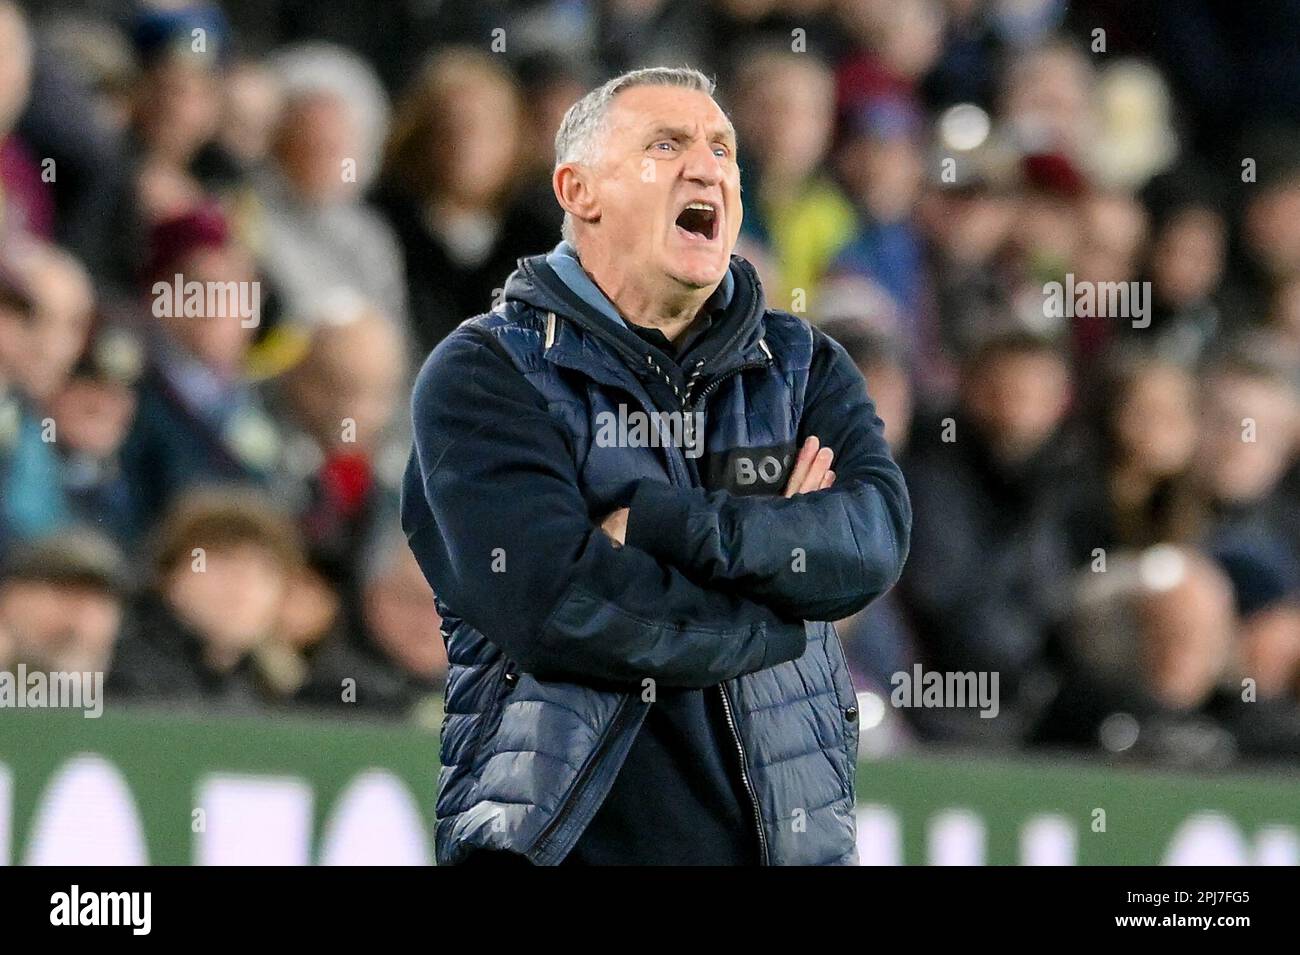 Sunderland Manager Tony Mowbray during the Sky Bet Championship match Burnley vs Sunderland at Turf Moor, Burnley, United Kingdom, 31st March 2023  (Photo by Ben Roberts/News Images) Stock Photo